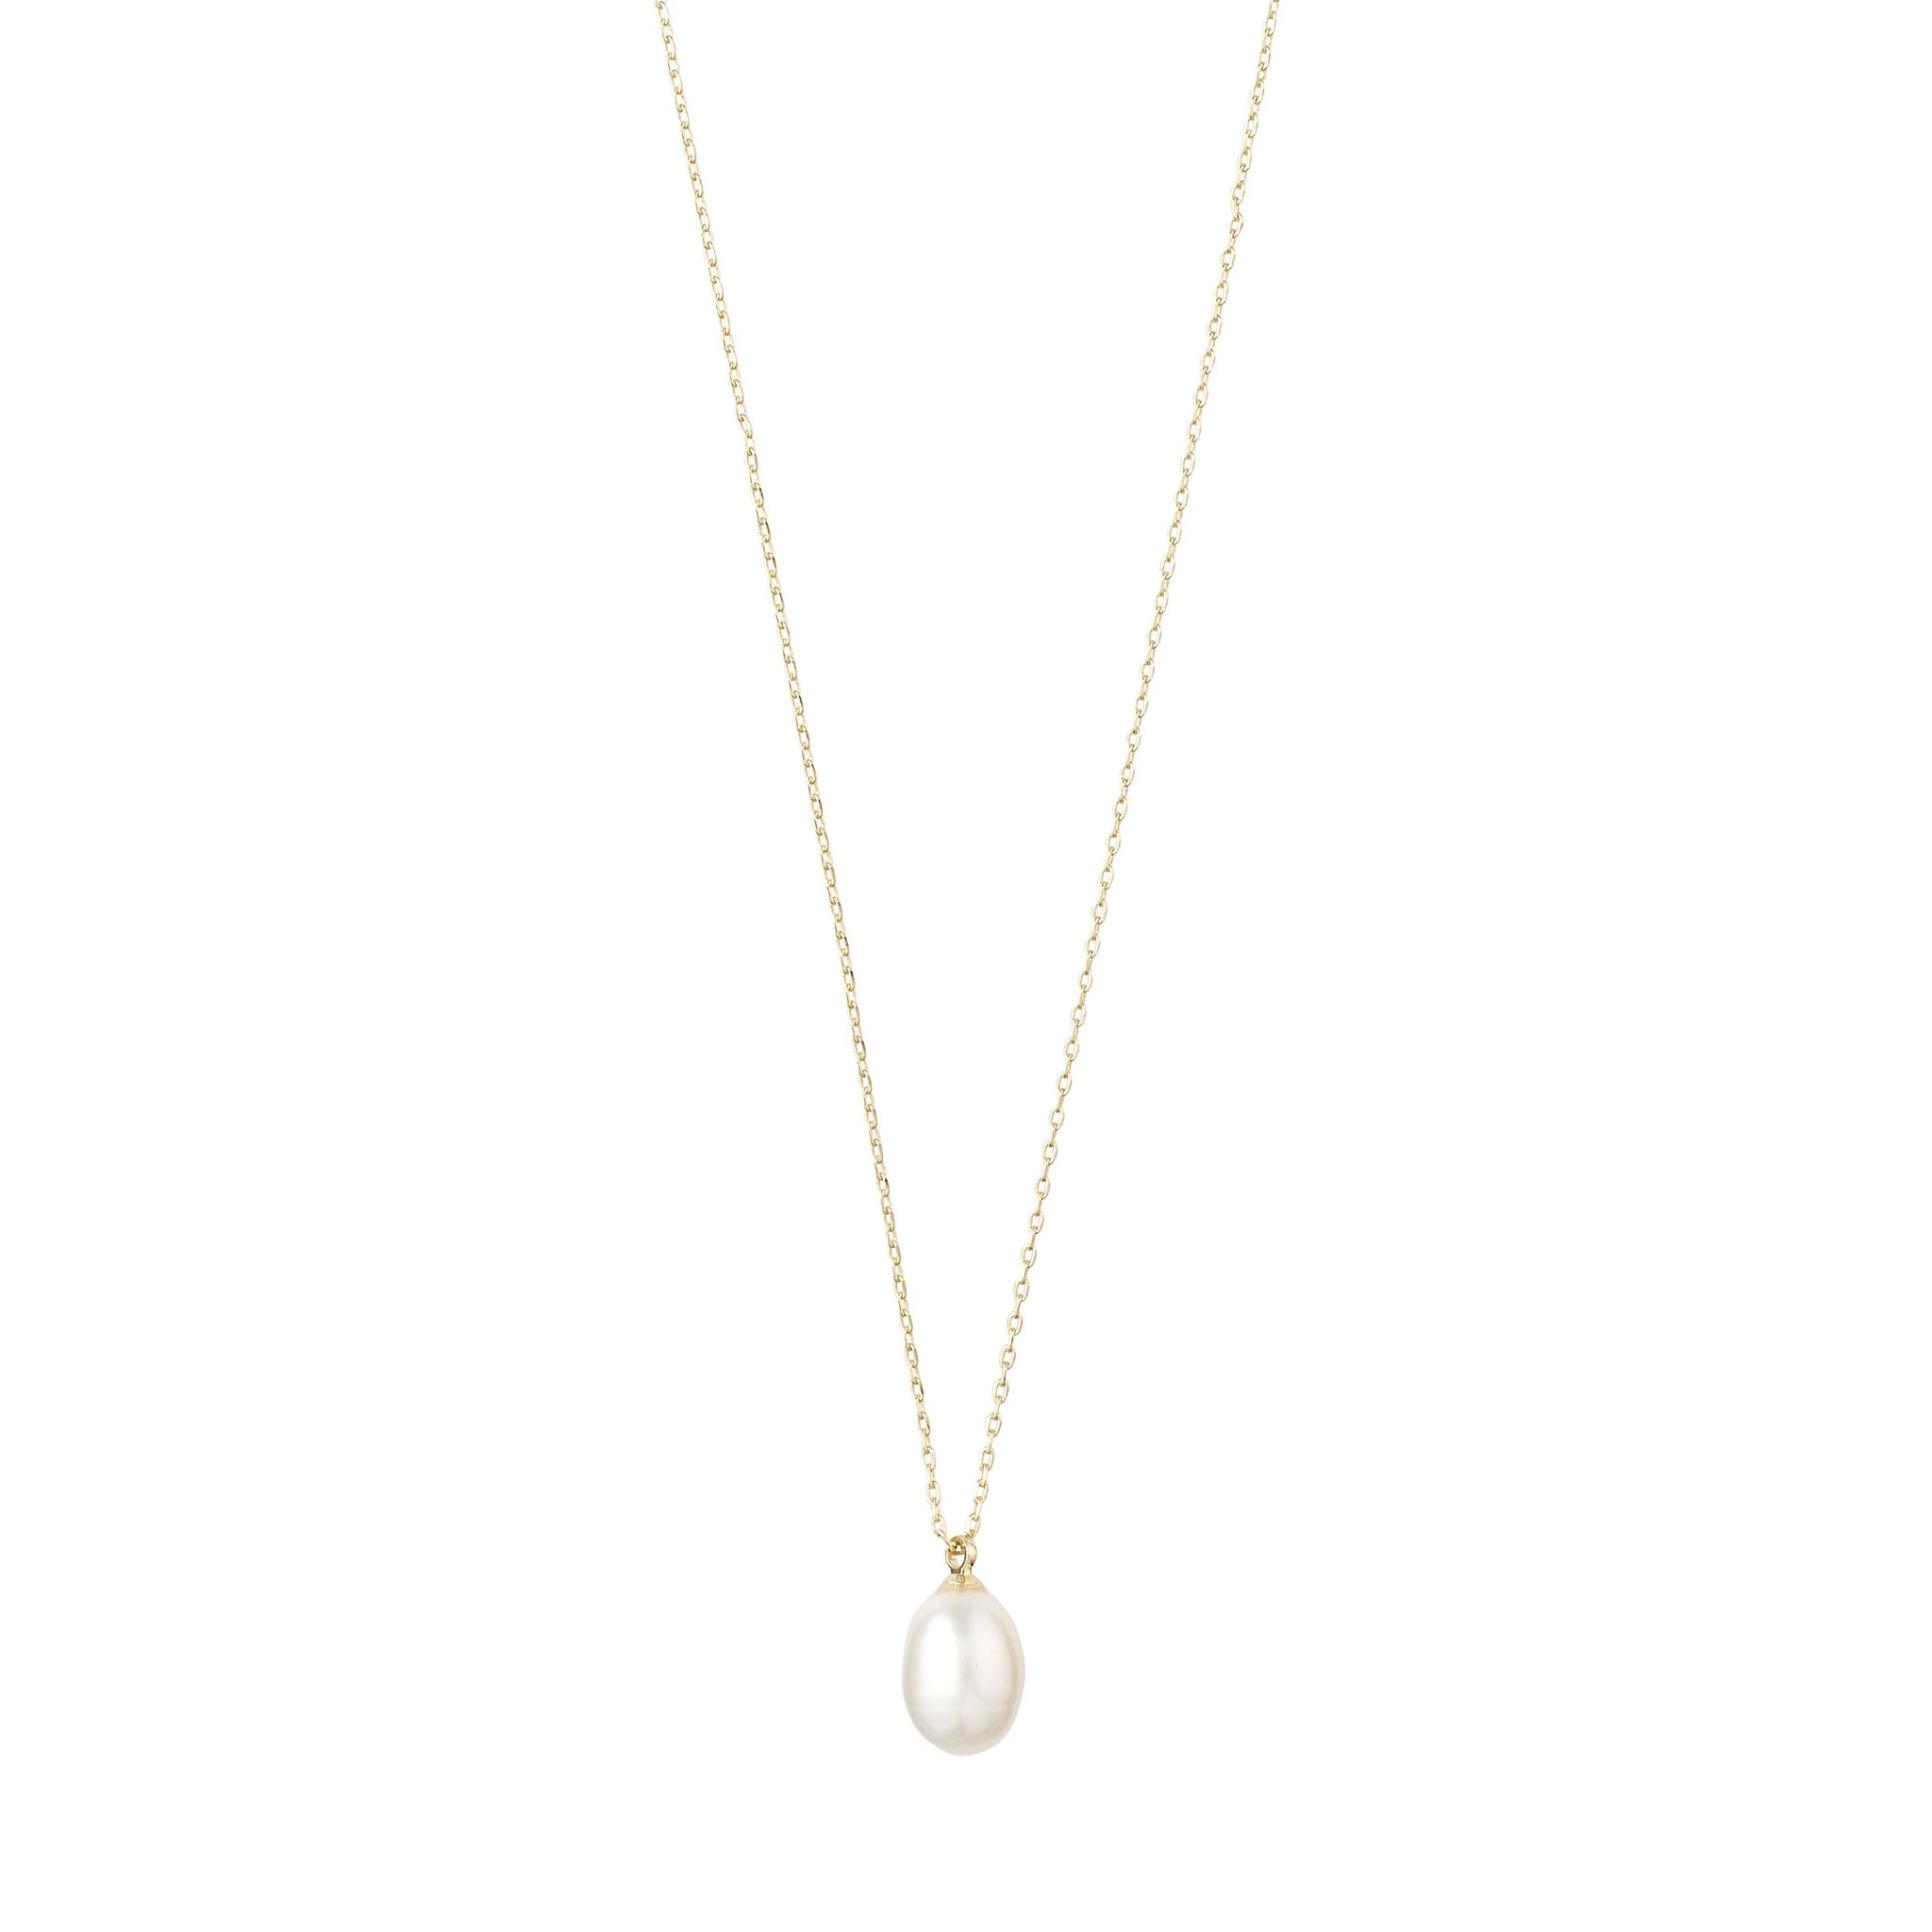 Eila Freshwater Pearl Necklace - Gold Plate